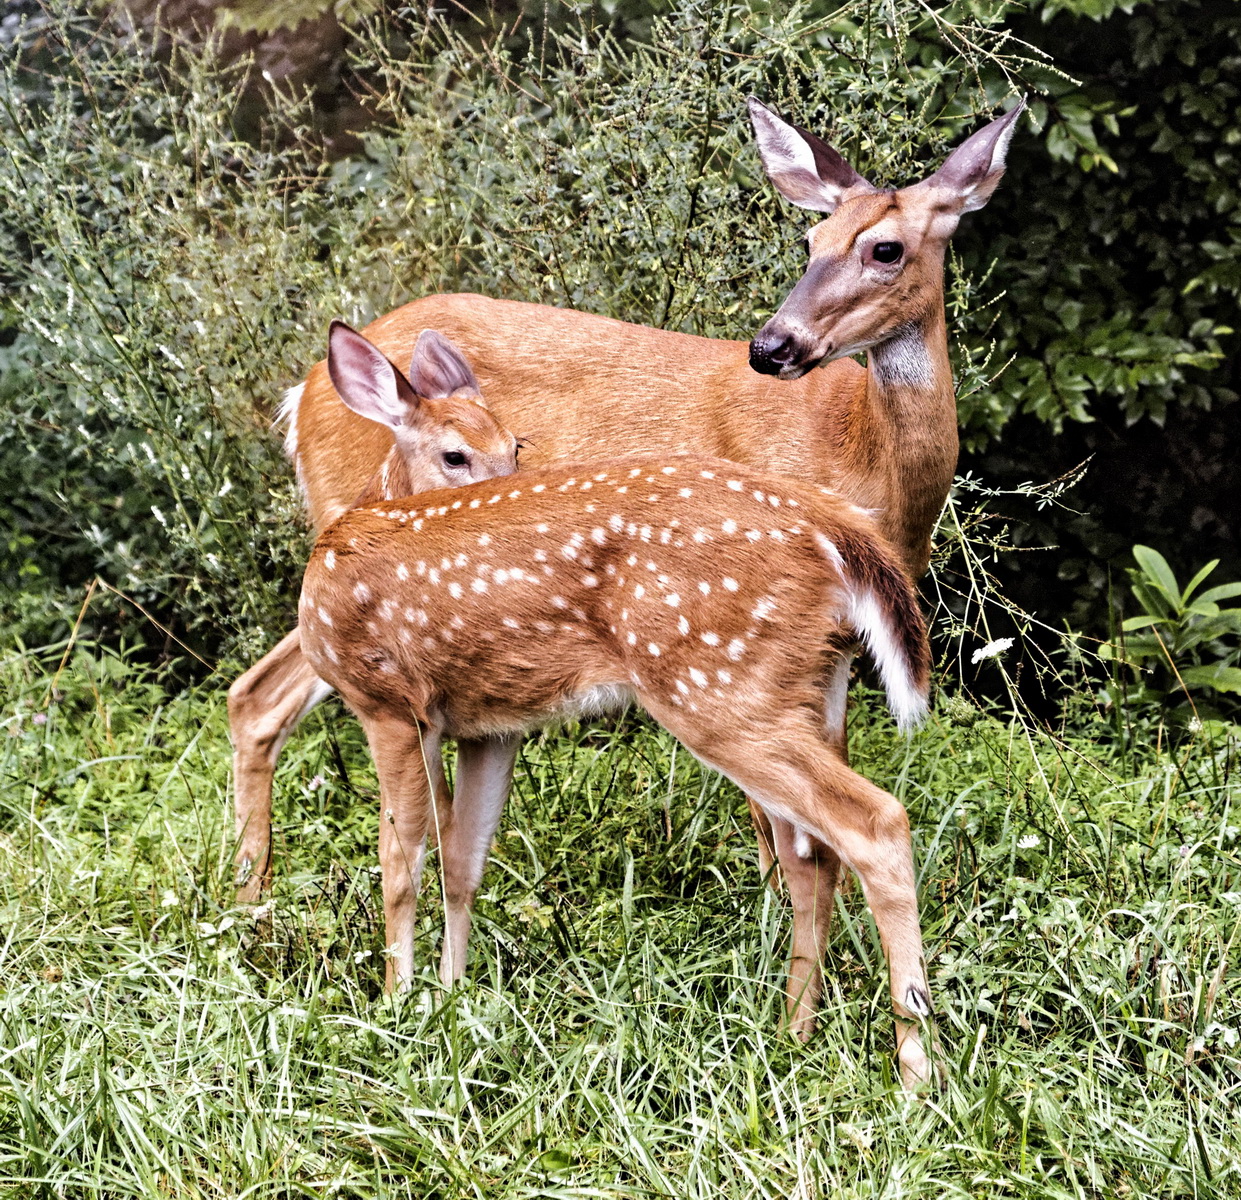 I Love You Mommy by Howard Clark, Art Exhibit at Brookside Gardens, phot of deer with baby deer